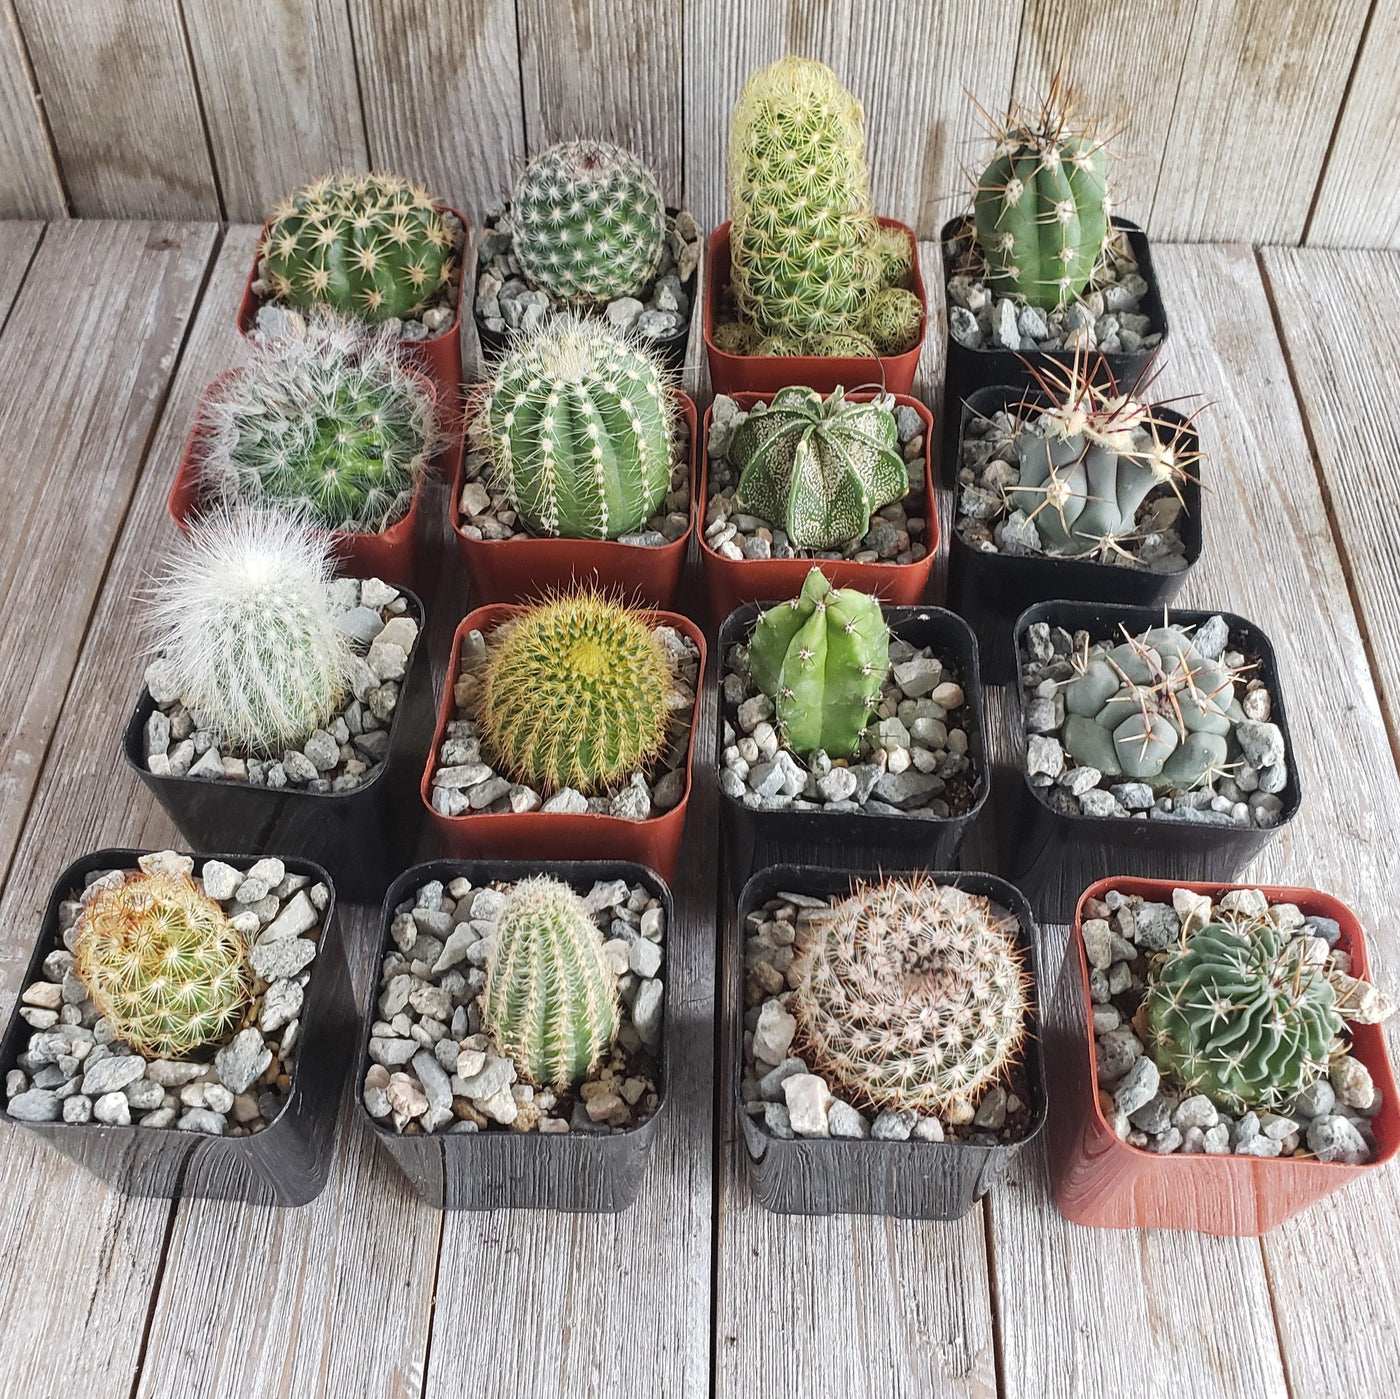 Assorted 2-Inch Cactus (16-Pack)